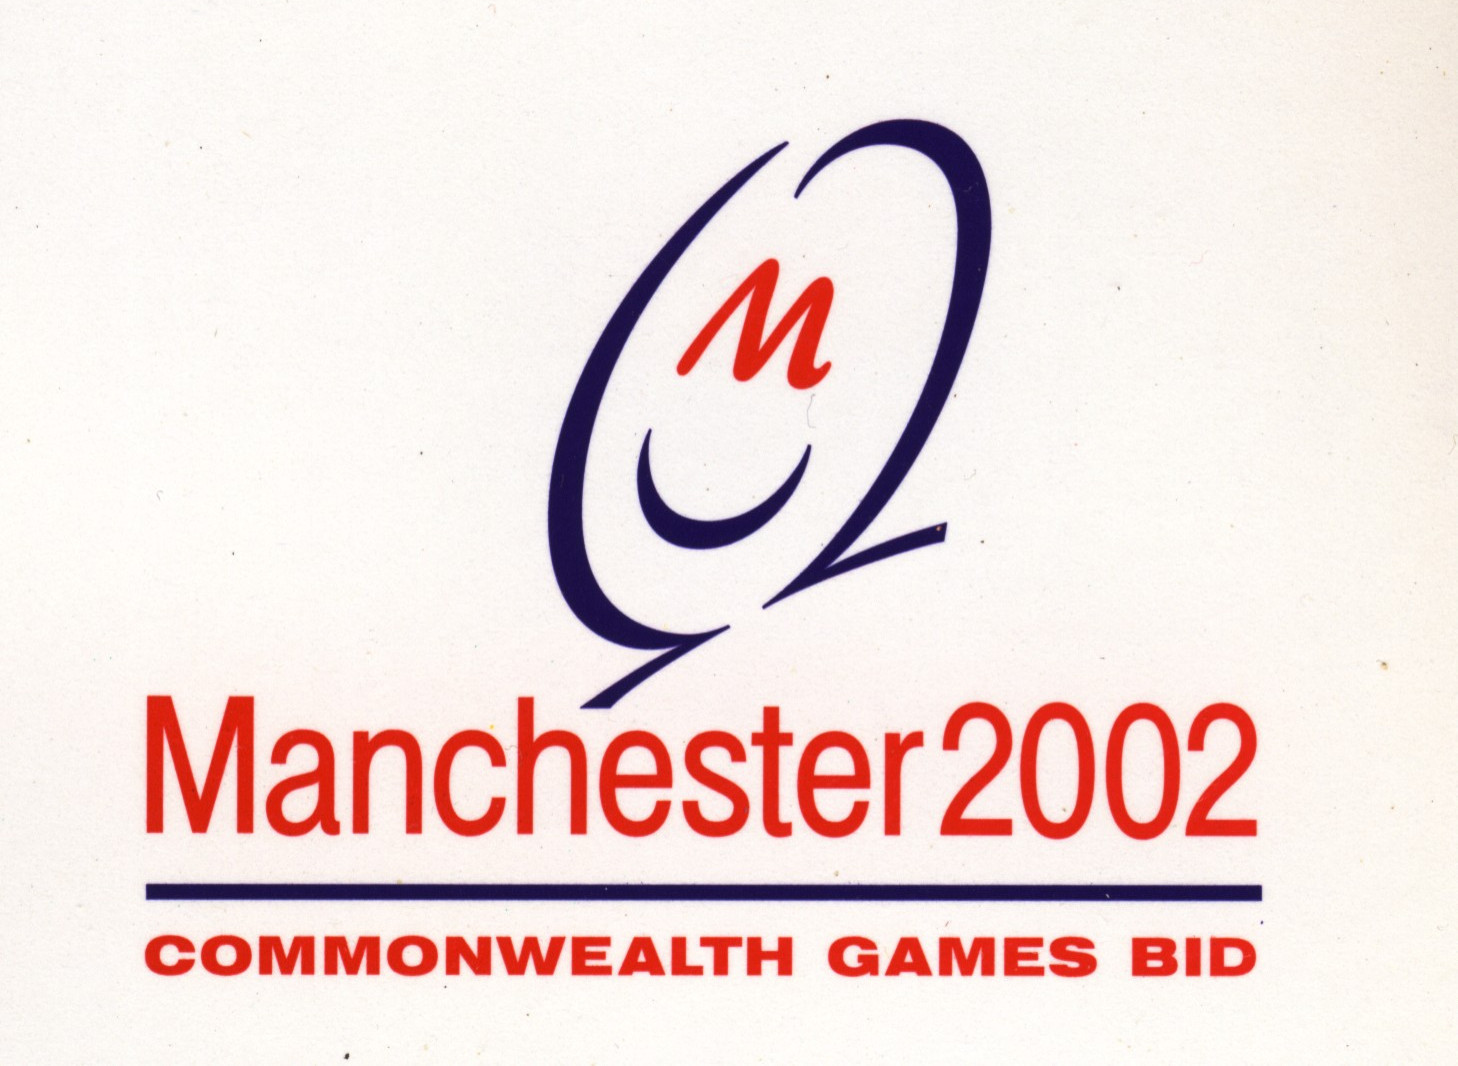 Manchester tabled a bid for the 2002 Commonwealth Games after an unsuccessful Olympic campaign ©Manchester 2002 Bid Committee 